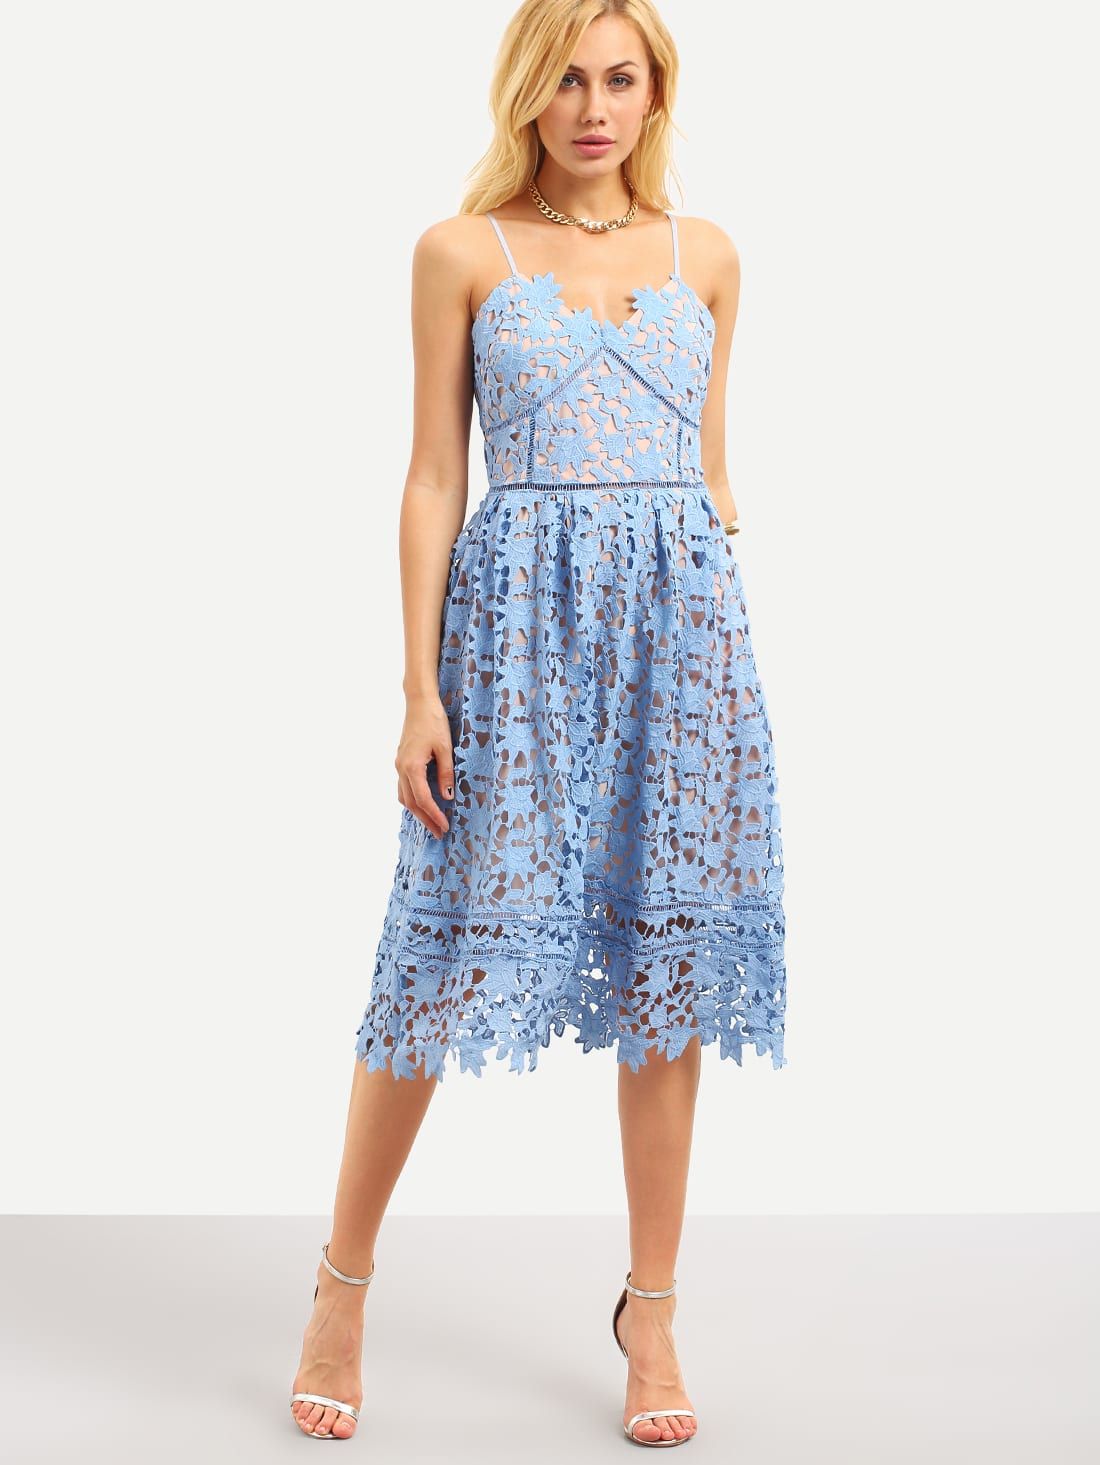 Hollow Out Fit & Flare Lace Cami Dress - Blue | Romwe